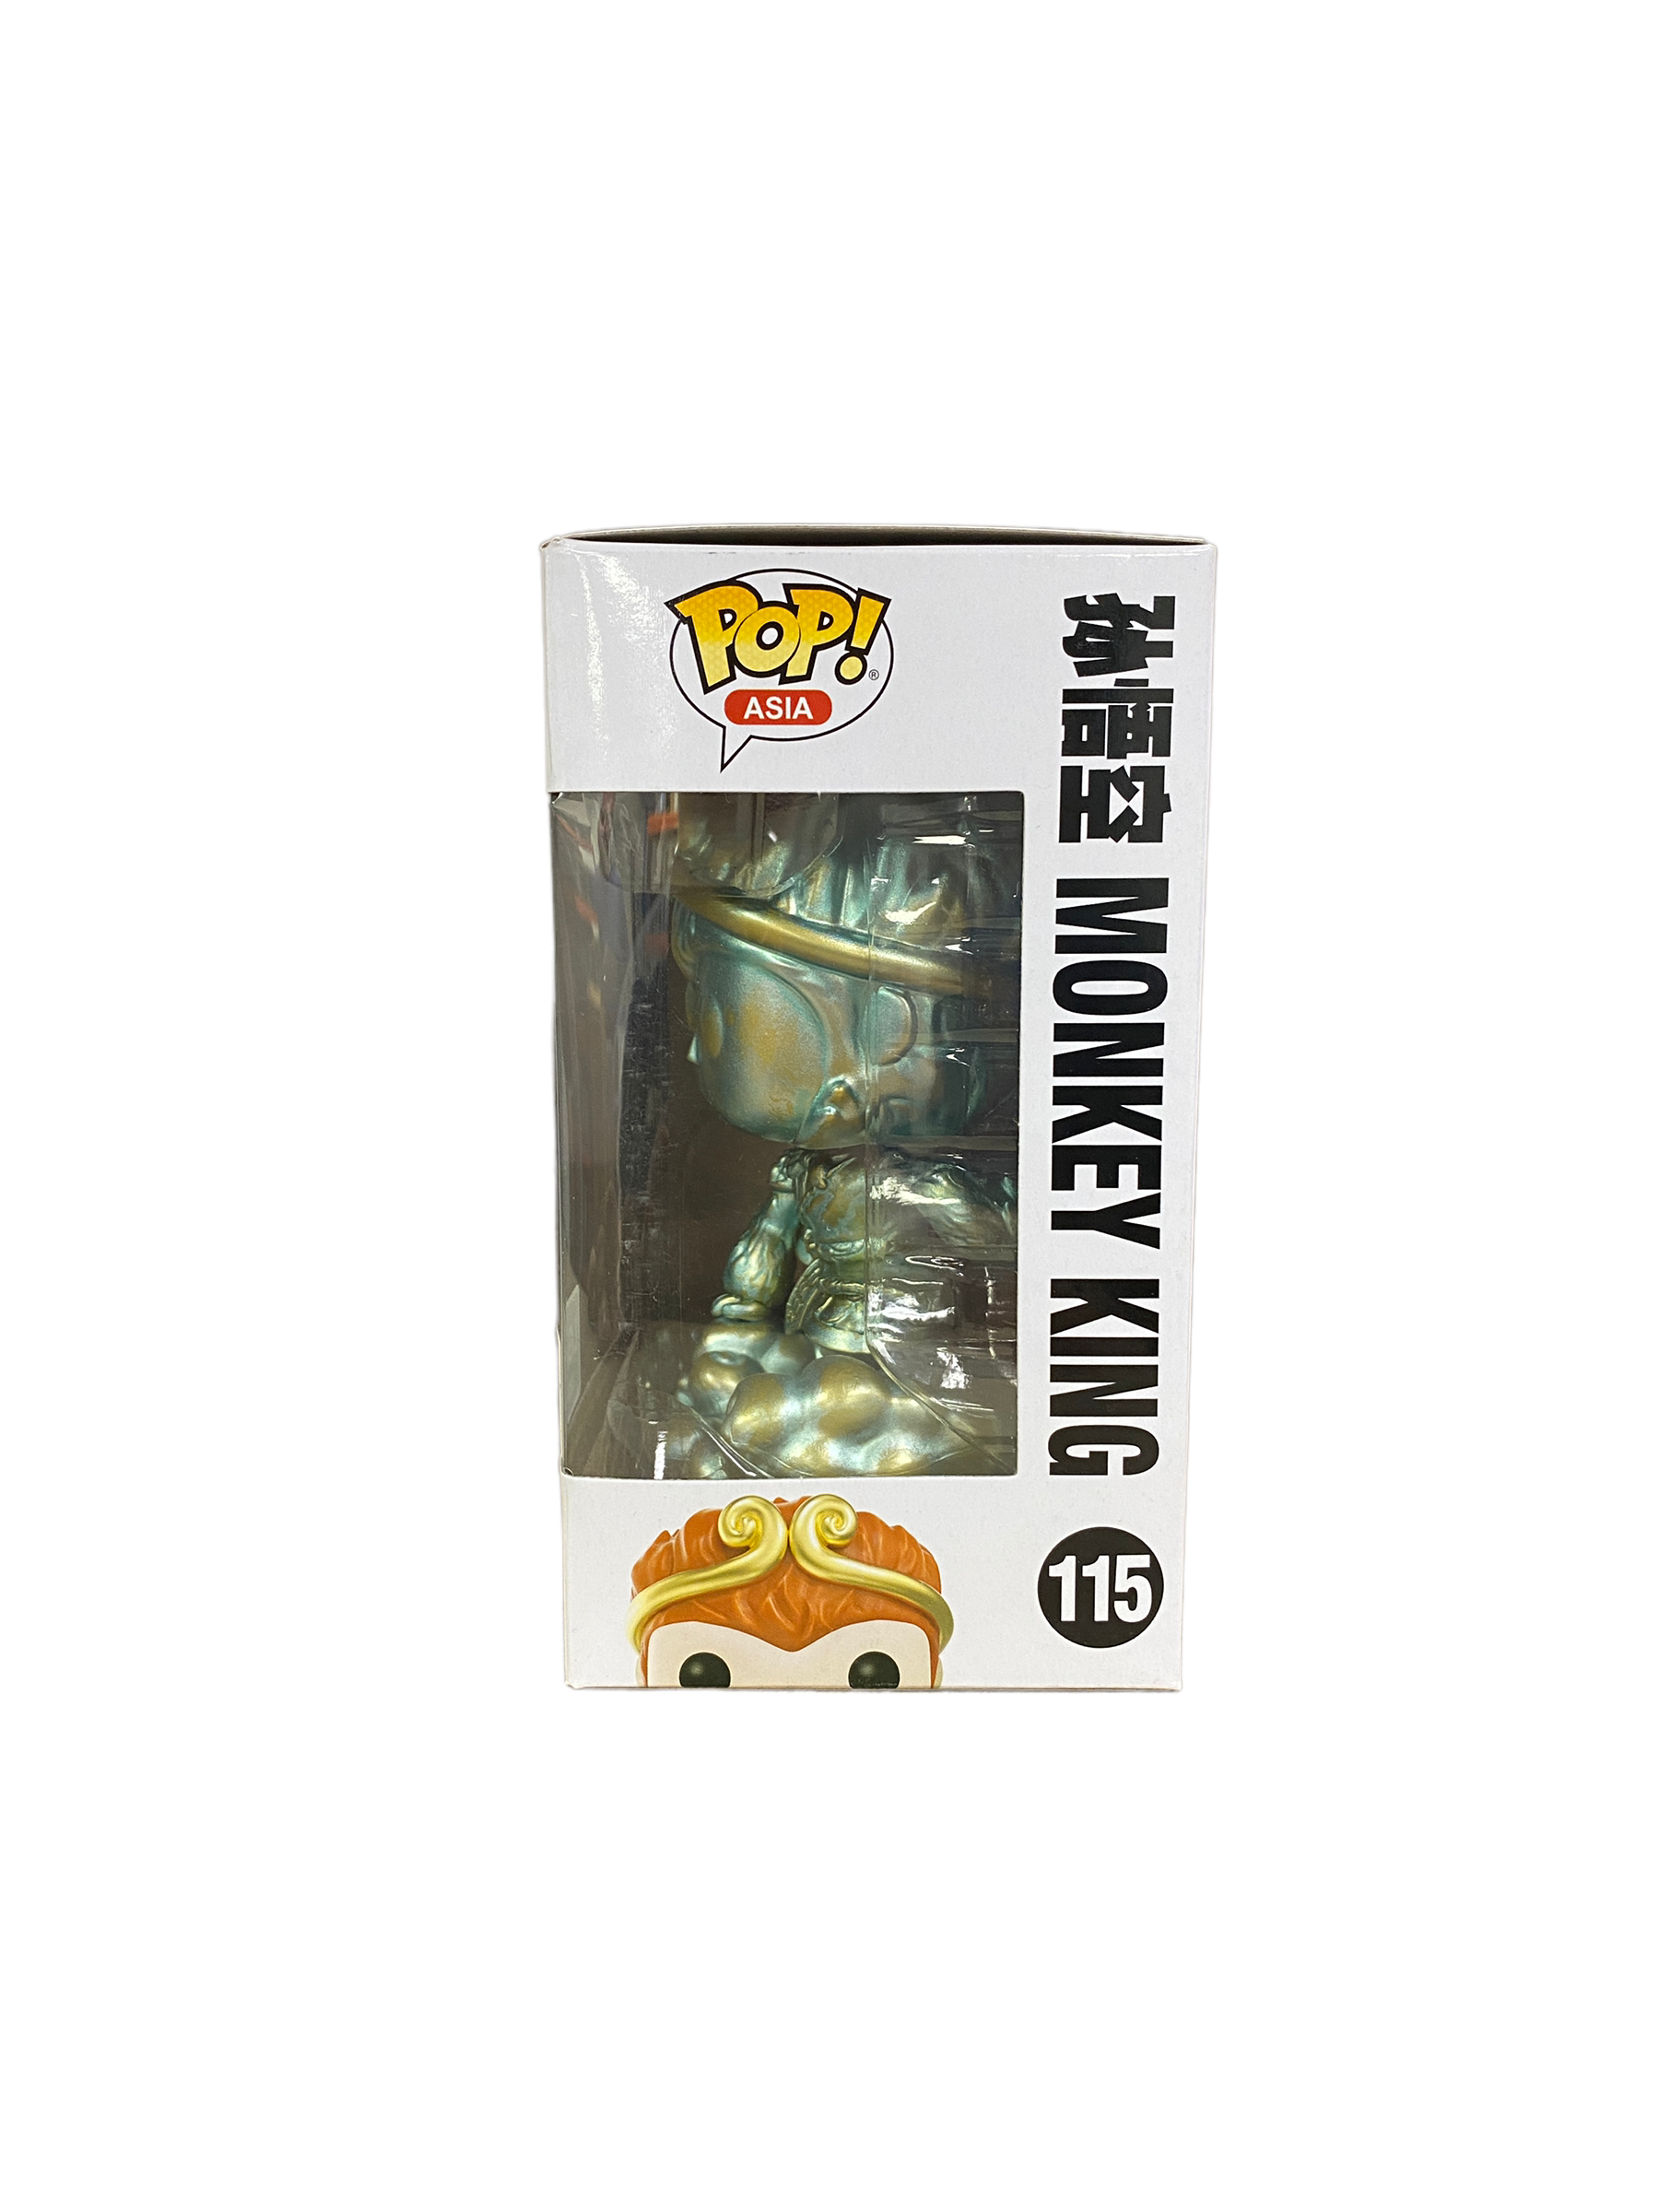 Monkey King #115 (Patina) Funko Pop! - Journey To The West - 2021 QTX QQ Toy Expo Exclusive - Condition 8.5/10